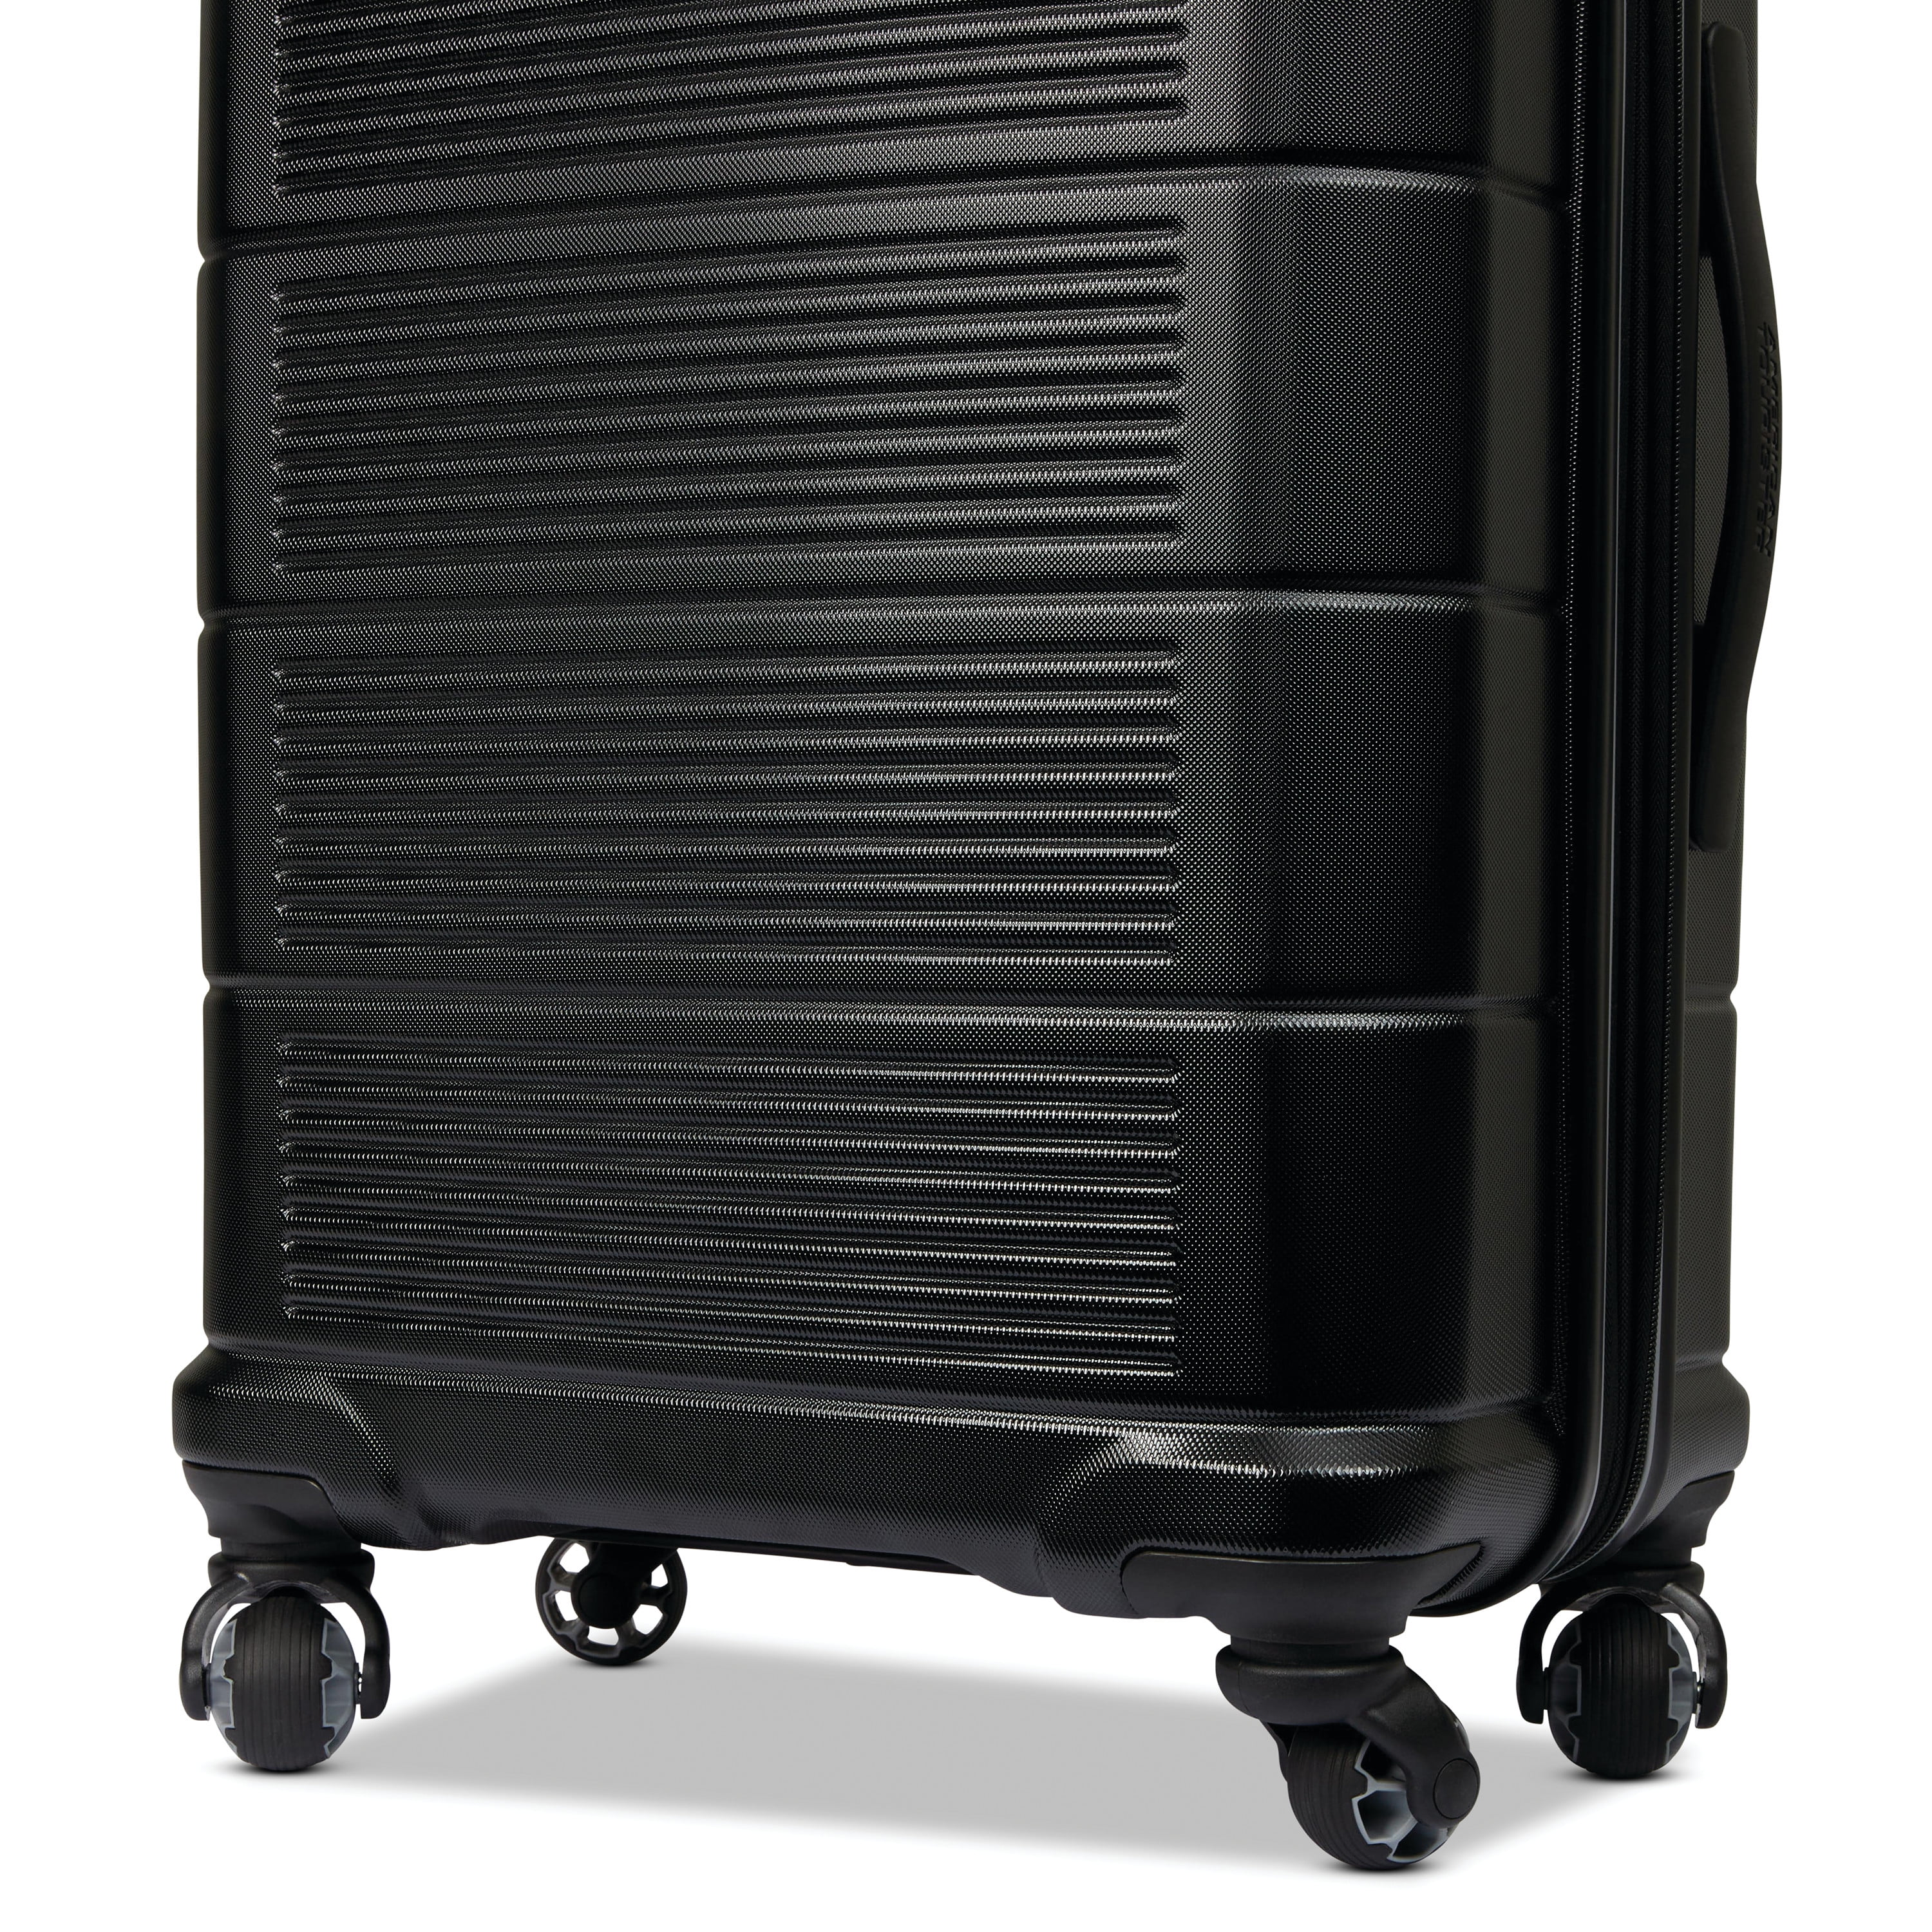 American Tourister Stratum 2.0 20 Hardside Carry-on Spinner Luggage One  Piece - Jet Black 